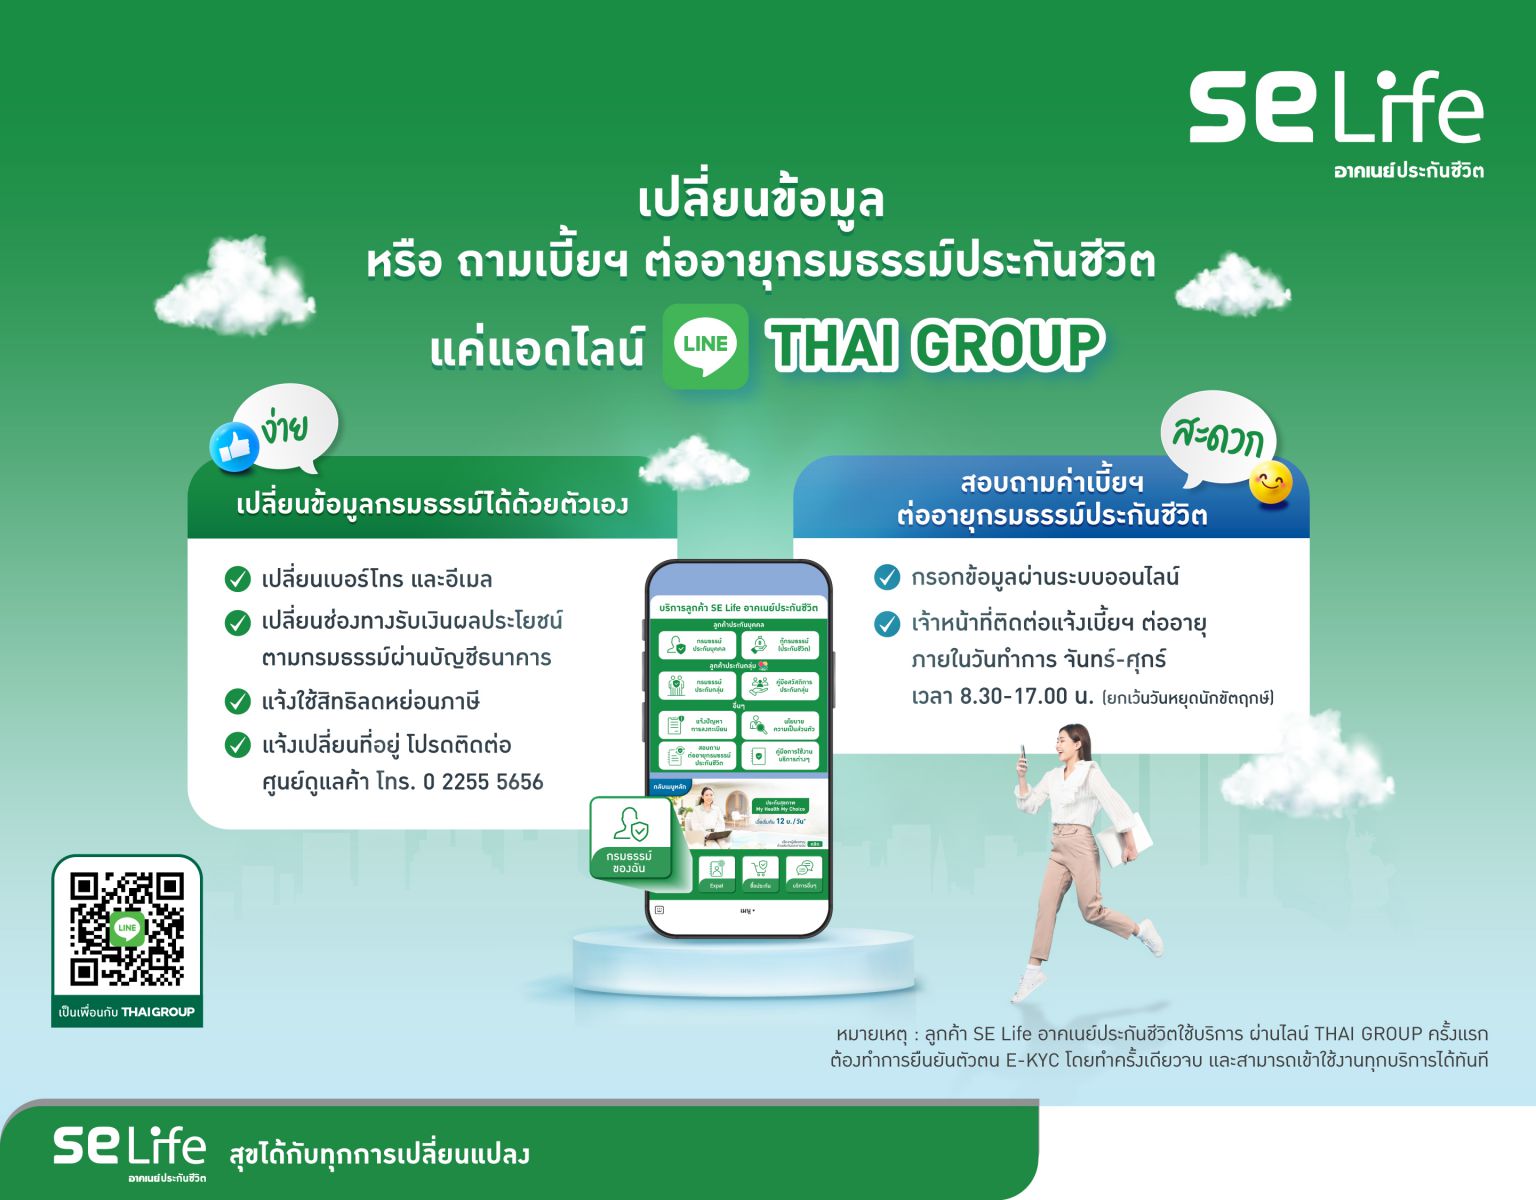 LineThaiGroup